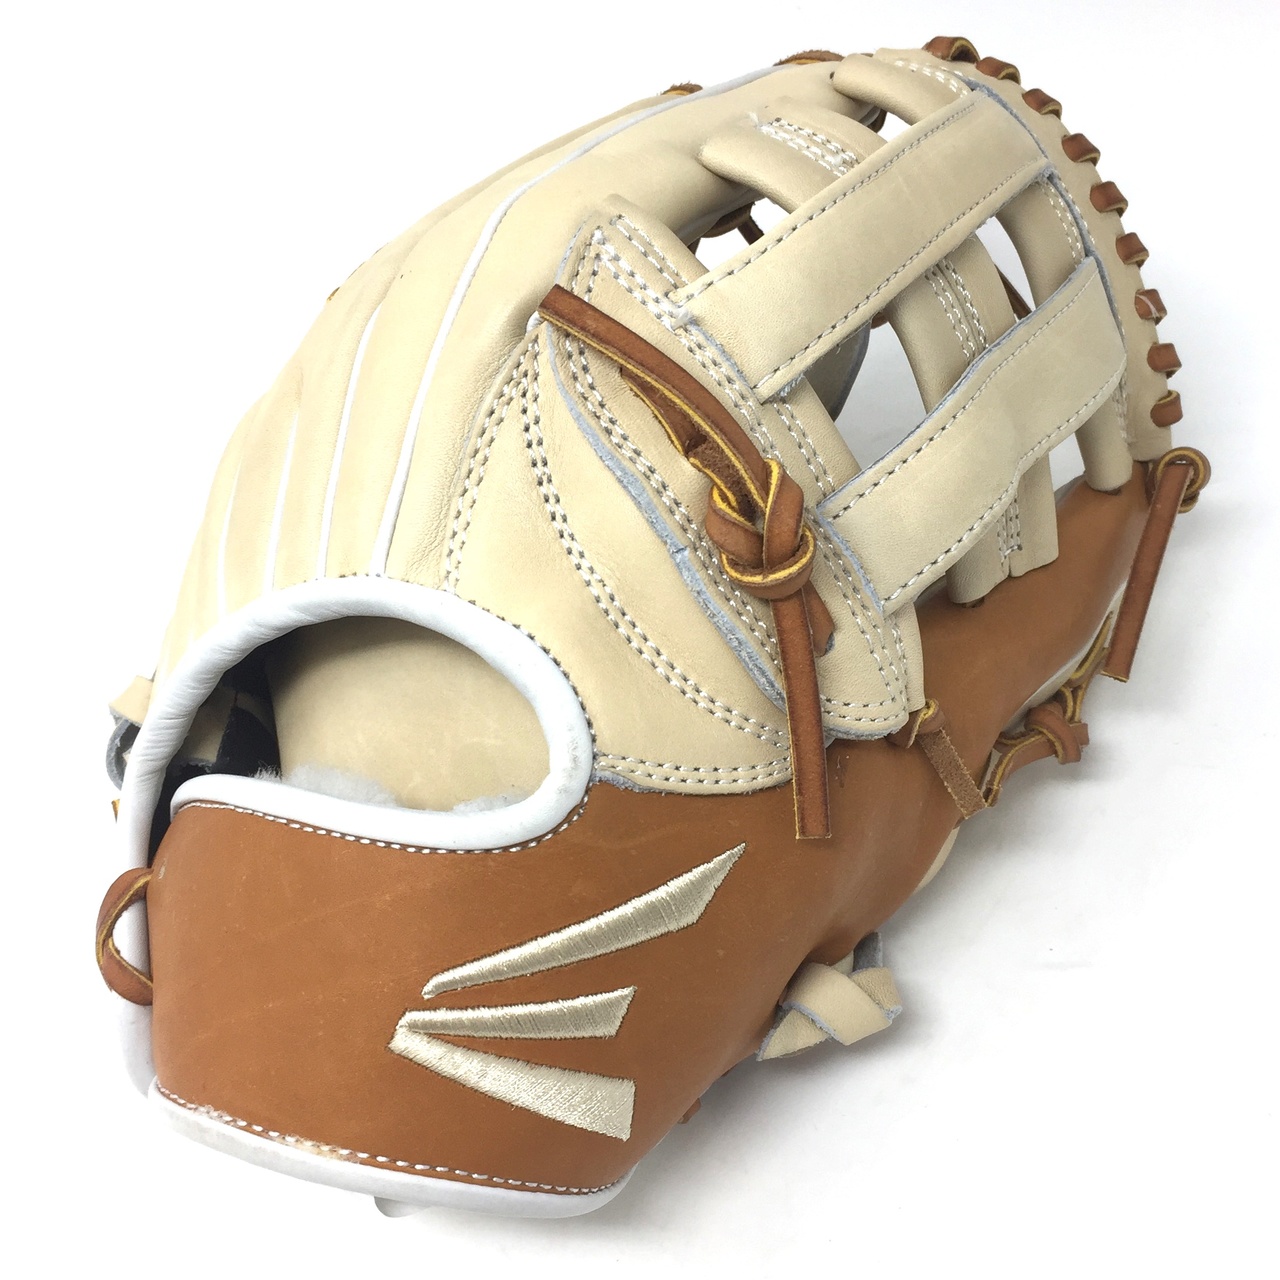 easton-small-batch-35-baseball-glove-11-75-right-hand-throw SMB35-C33-RightHandThrow Easton 628412242292 <span>Eastons Small Batch project focuses on ball glove development using only